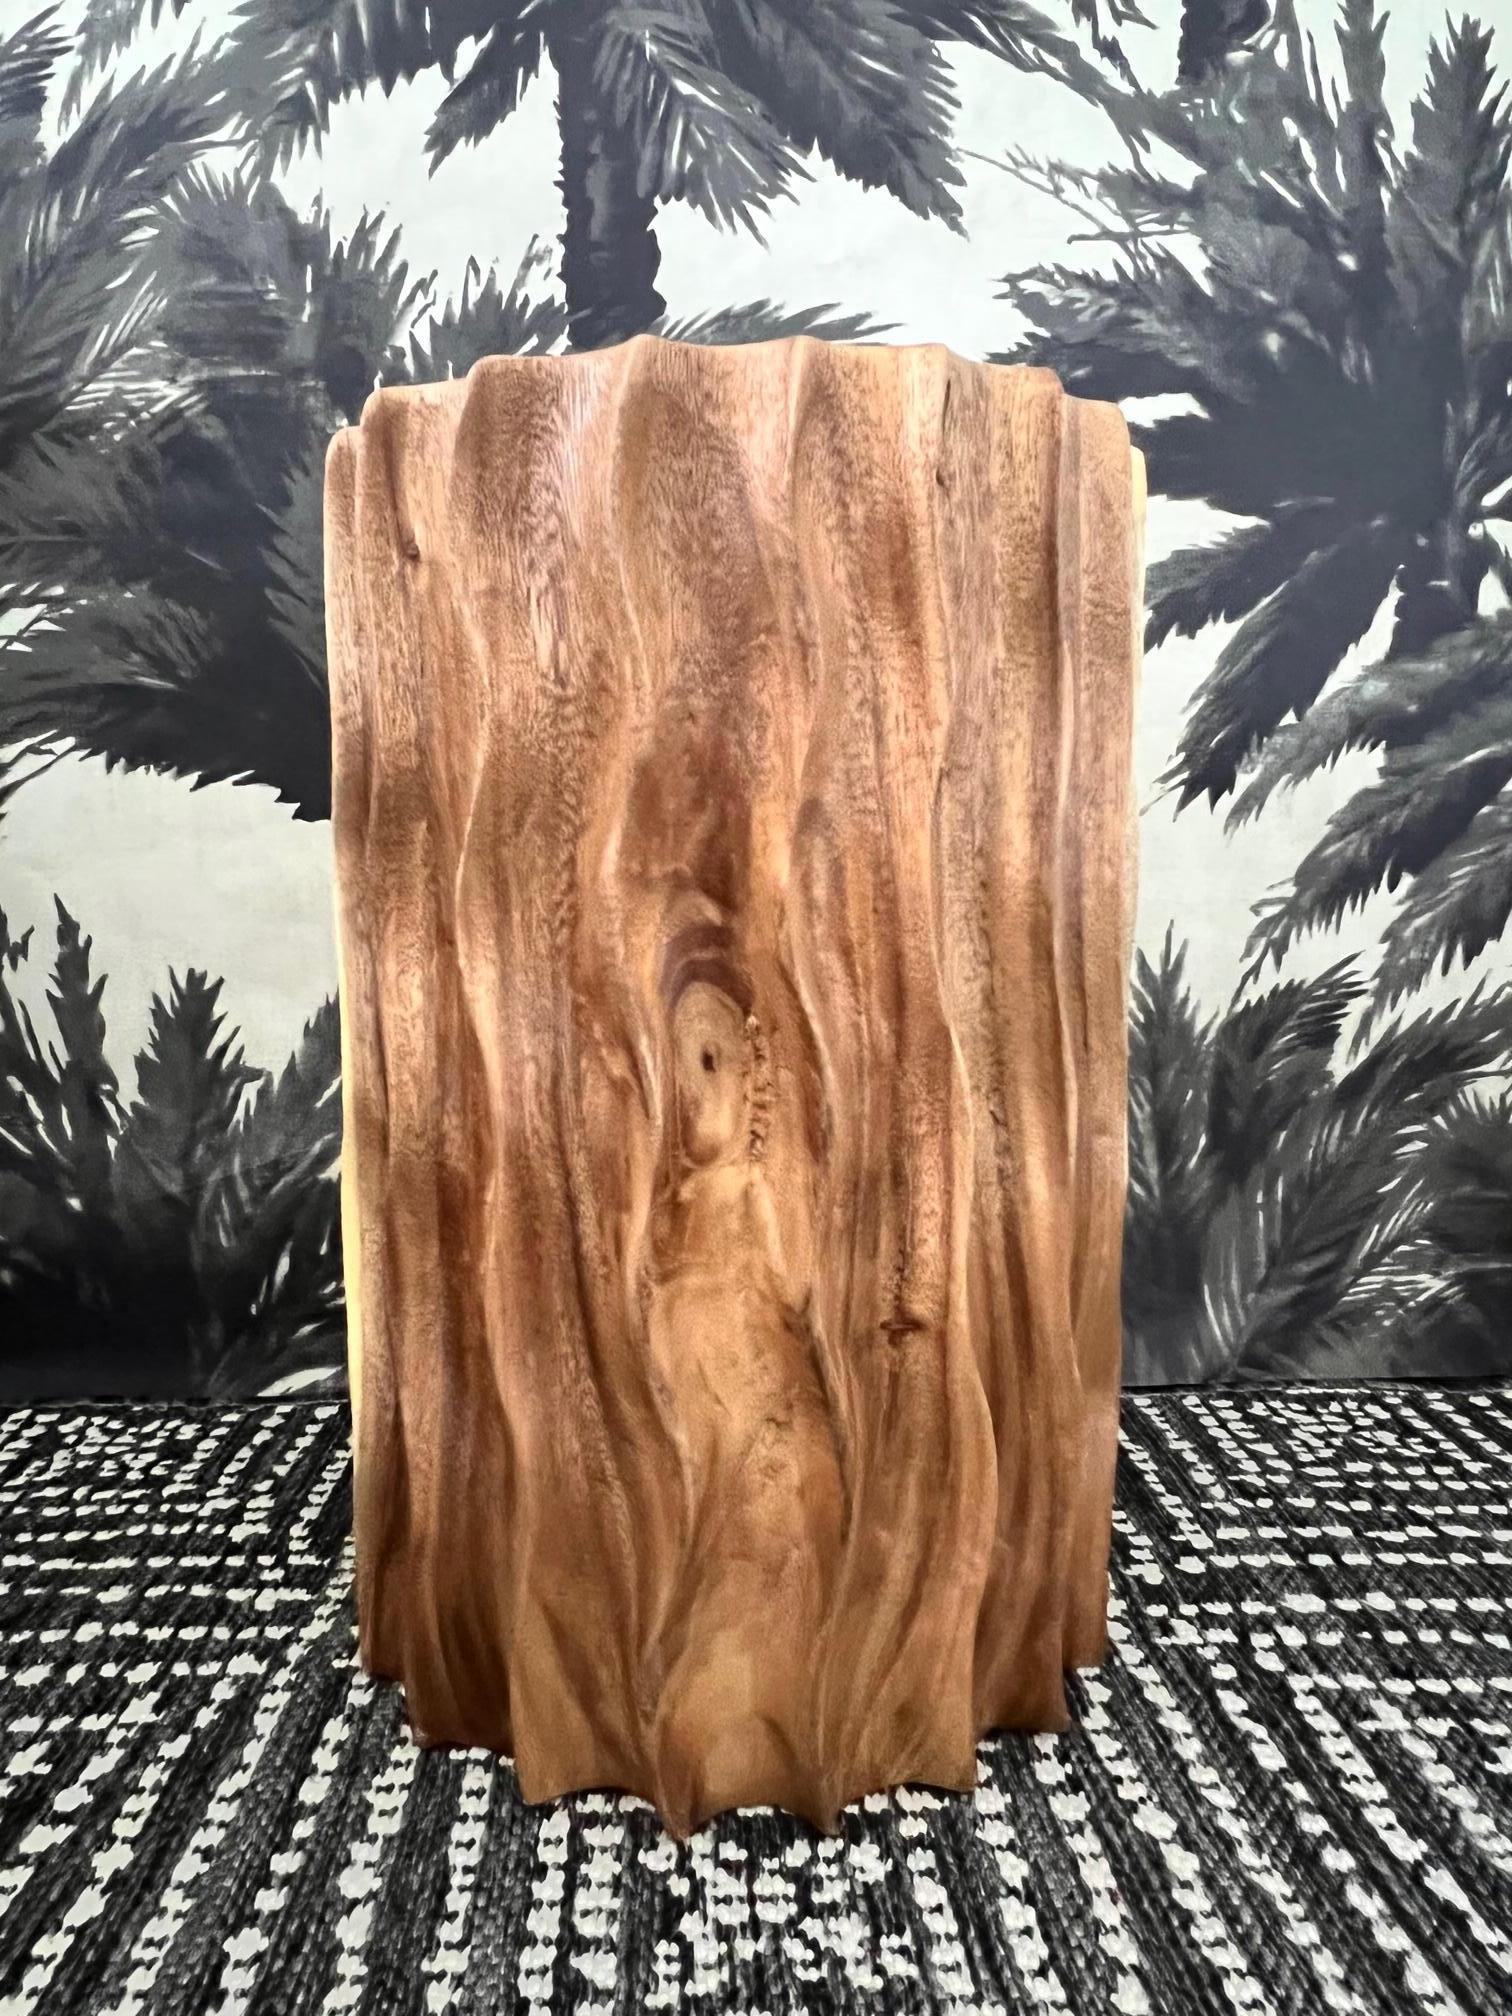 Sculptural Wood Side Table and Stump with Fluted Sides, Thailand 2